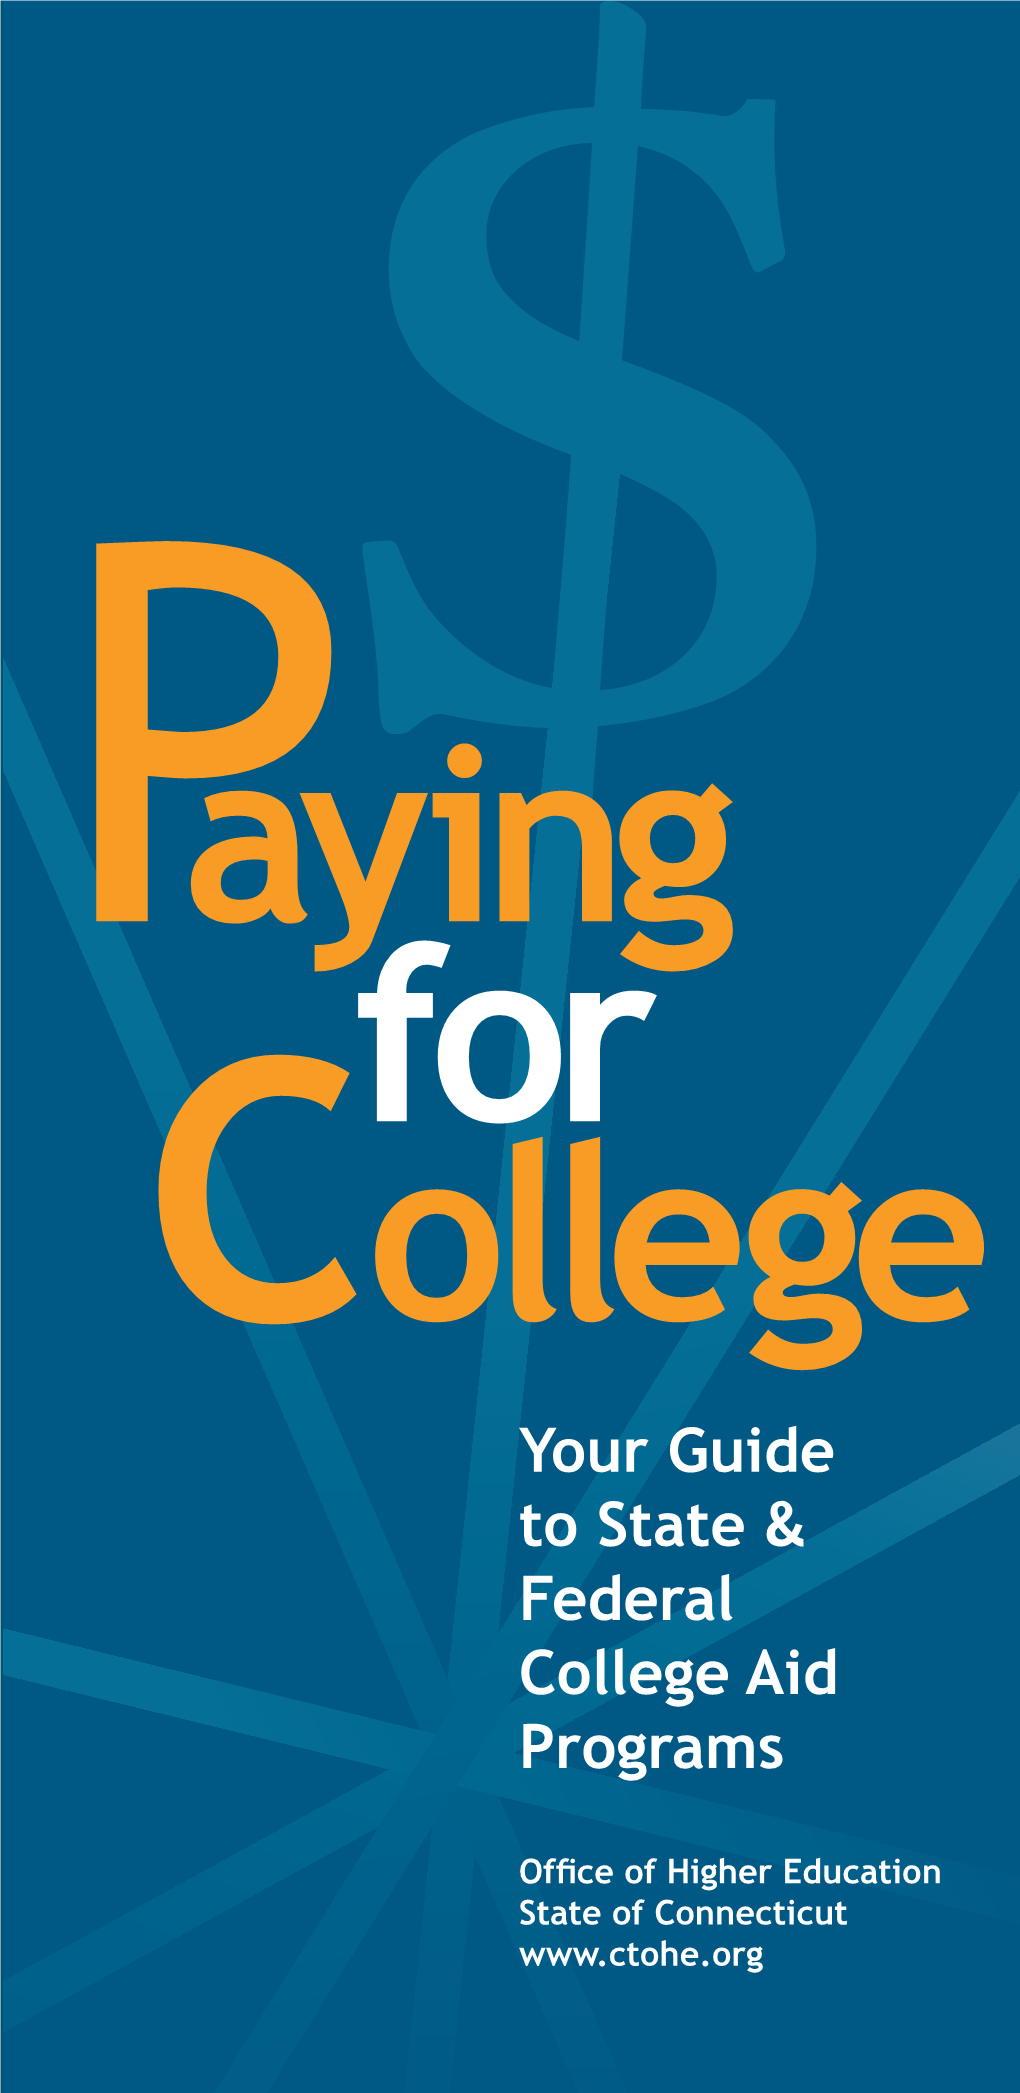 Paying for College Missing Your College’S FAFSA Priority Deadline Education on Planning, Preparing and Paying Grants Depending on Your Interests and Background